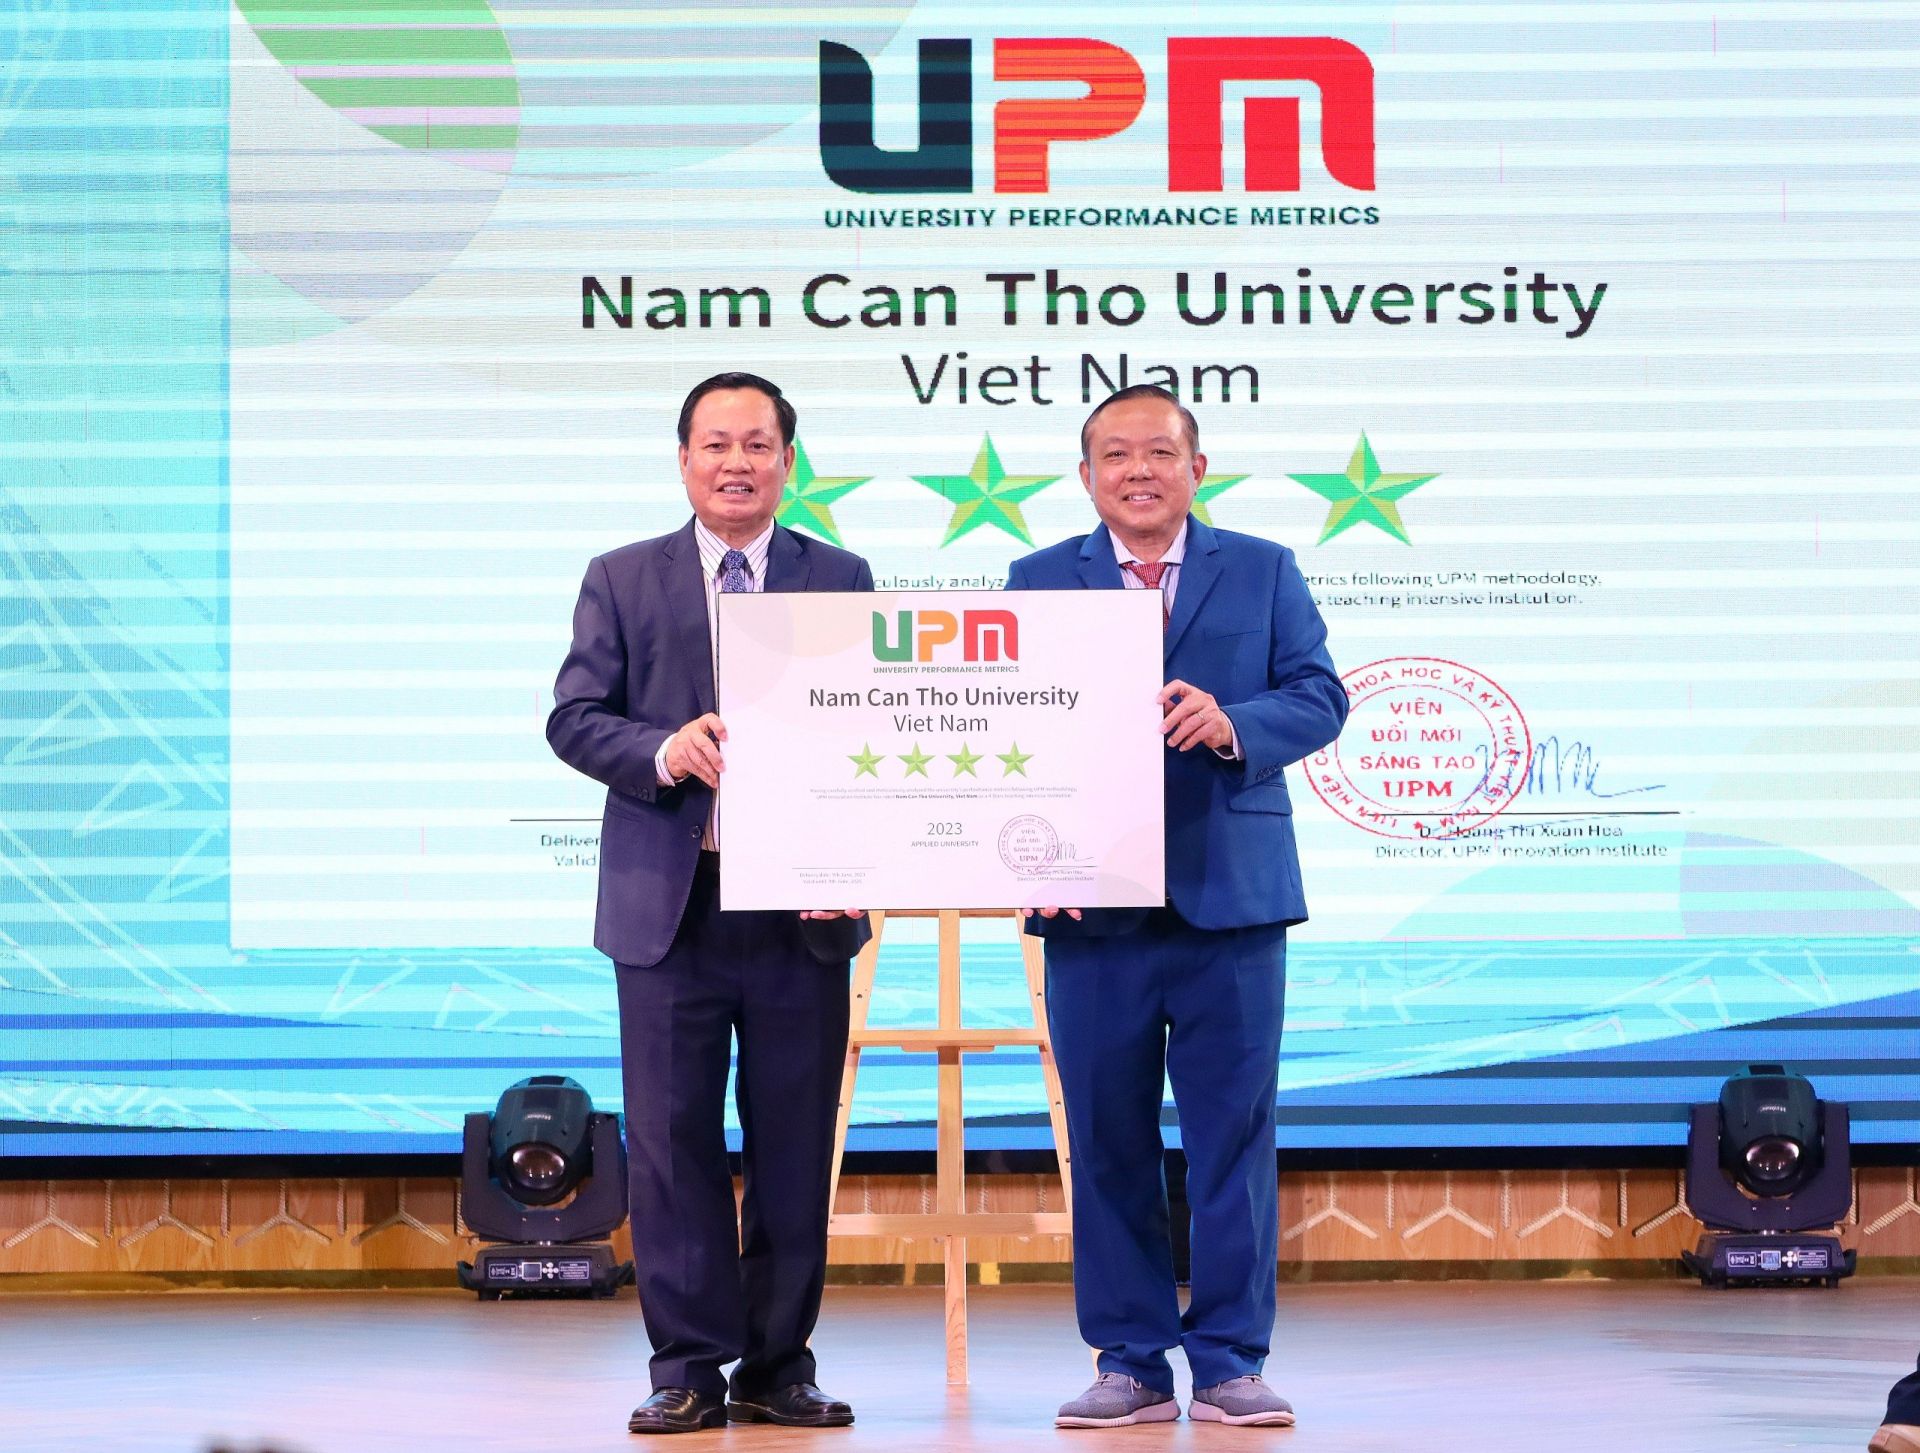 Dr. Nguyen Tien Dung - Chairman of the University Council (right), on behalf of CTU, receives the UPM 4-star comparative ranking certificate from Prof. Dr. Nguyen Huu Duc - Founding Chairman of the UPM Institute of Innovation